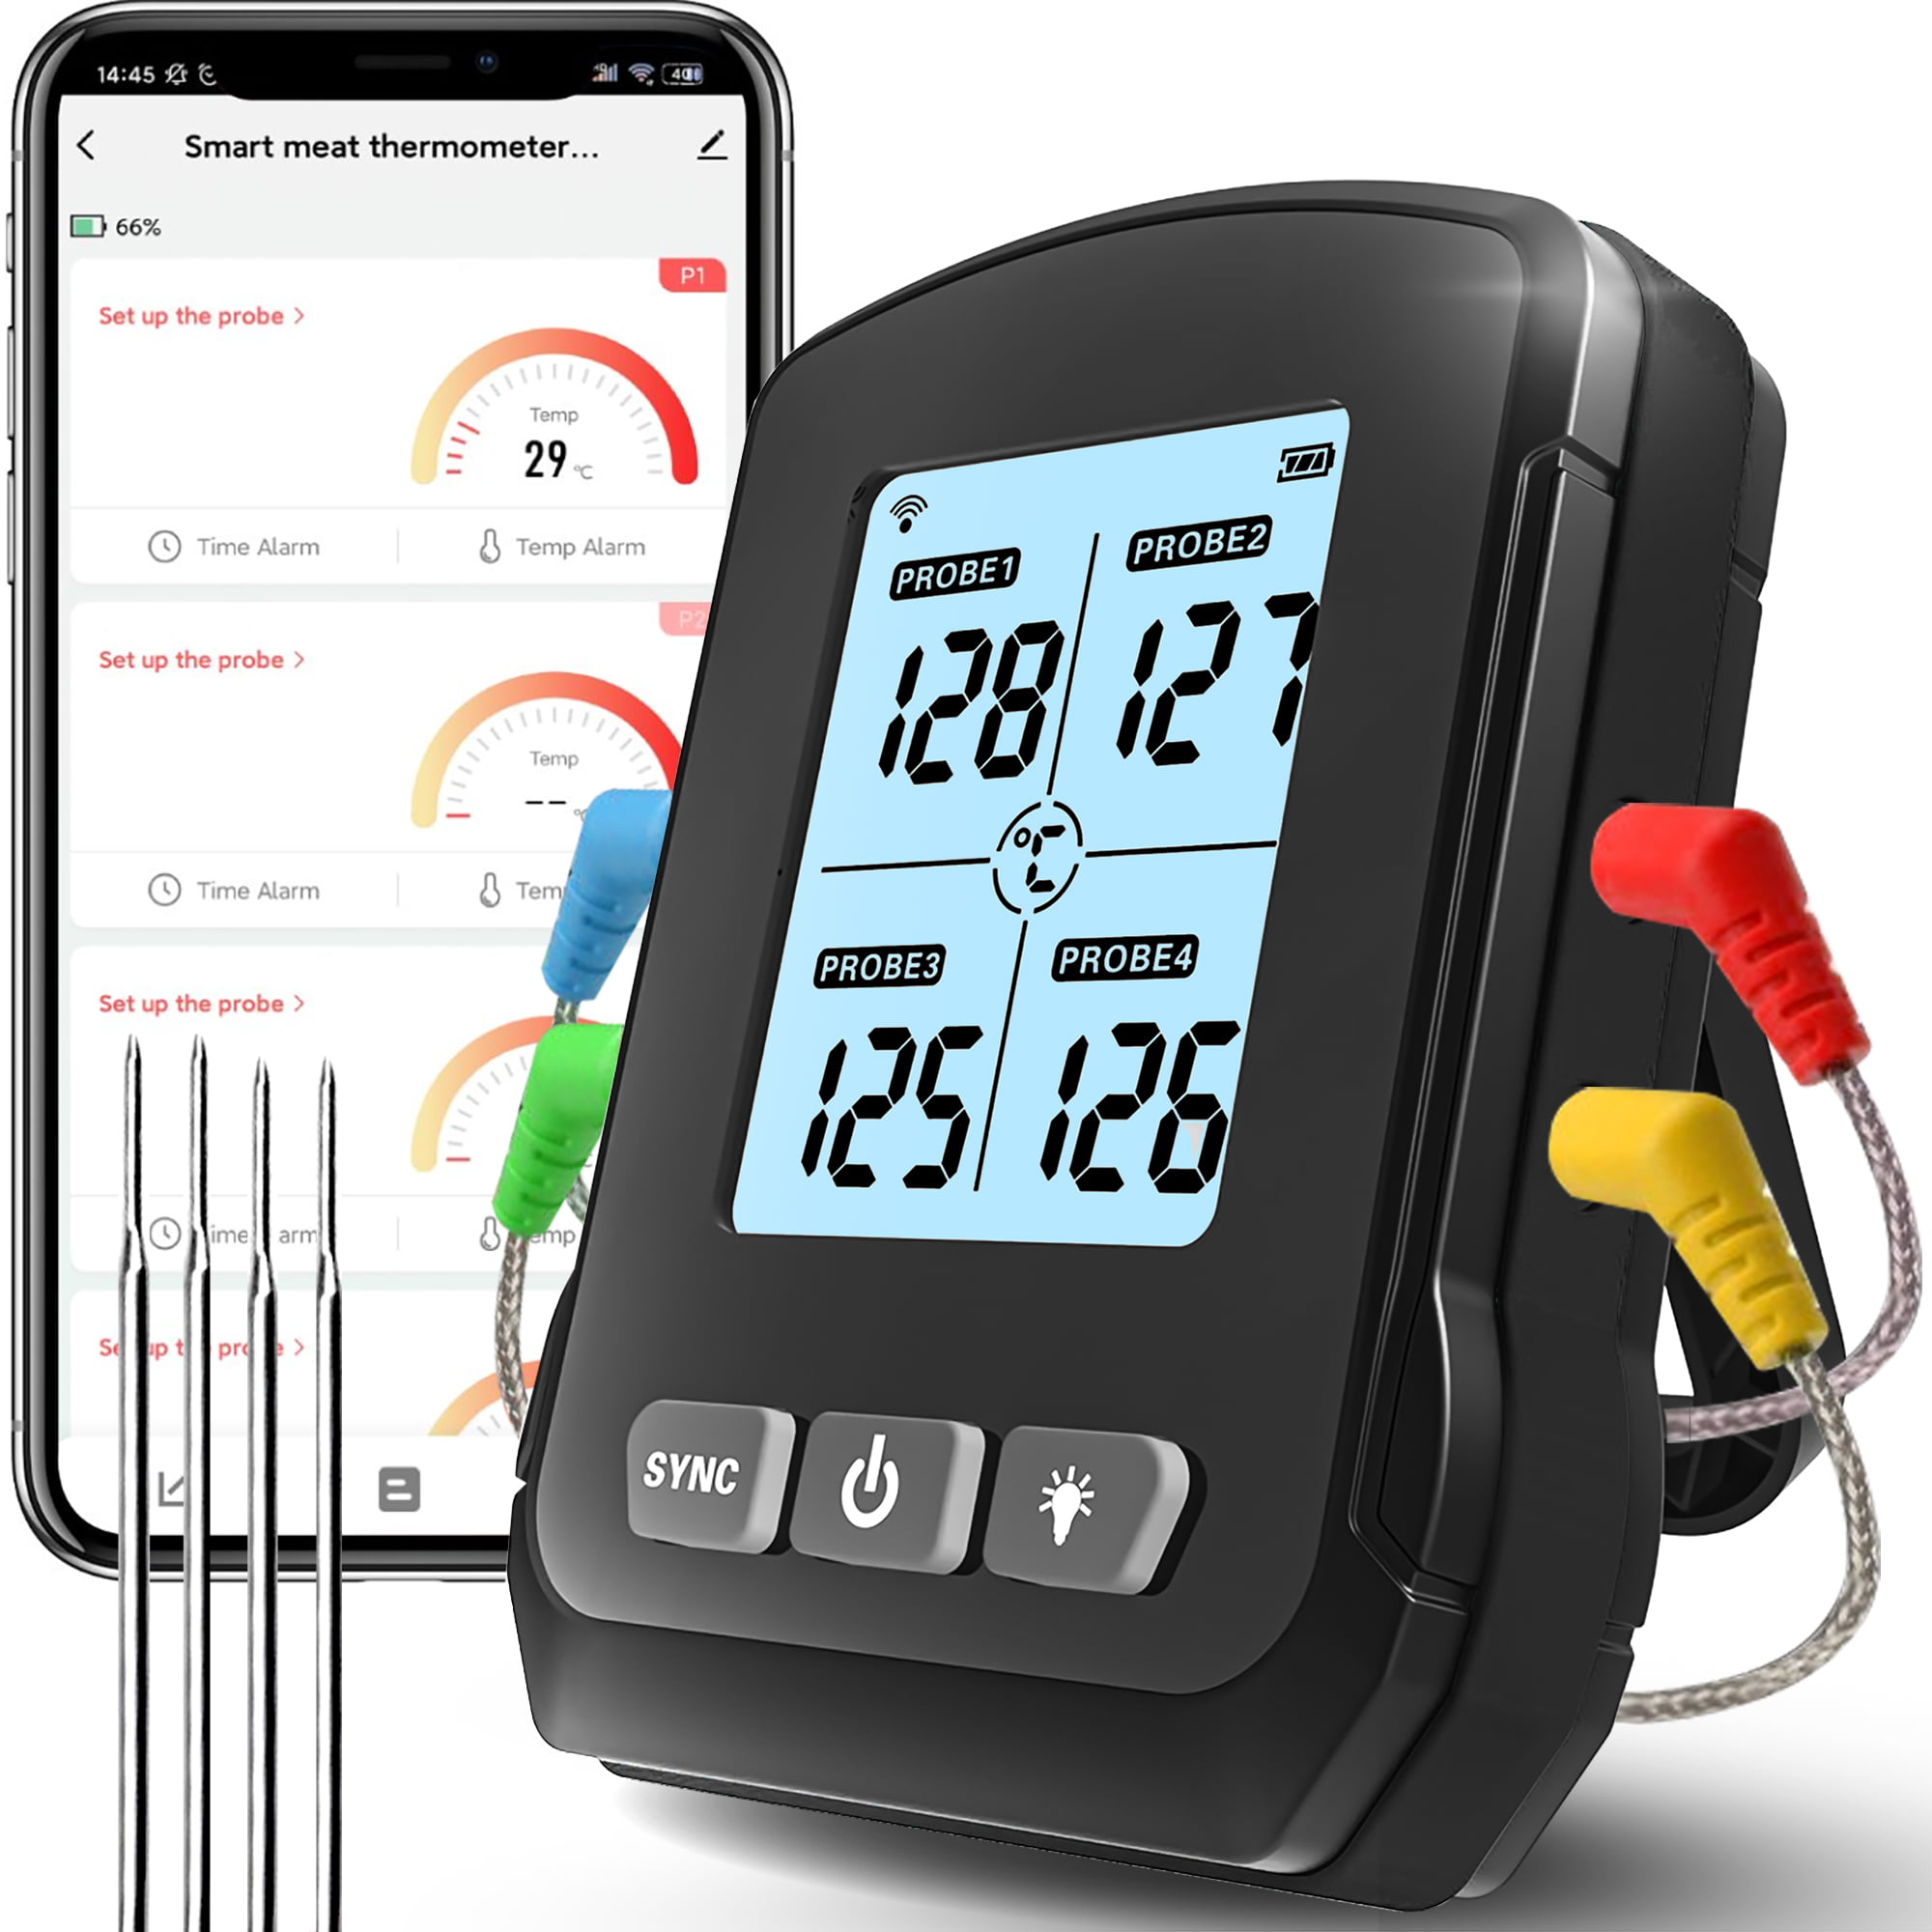 Multi Probe Digital Meat Thermometer Wireless For Oven Grill Kitchen BBQKr